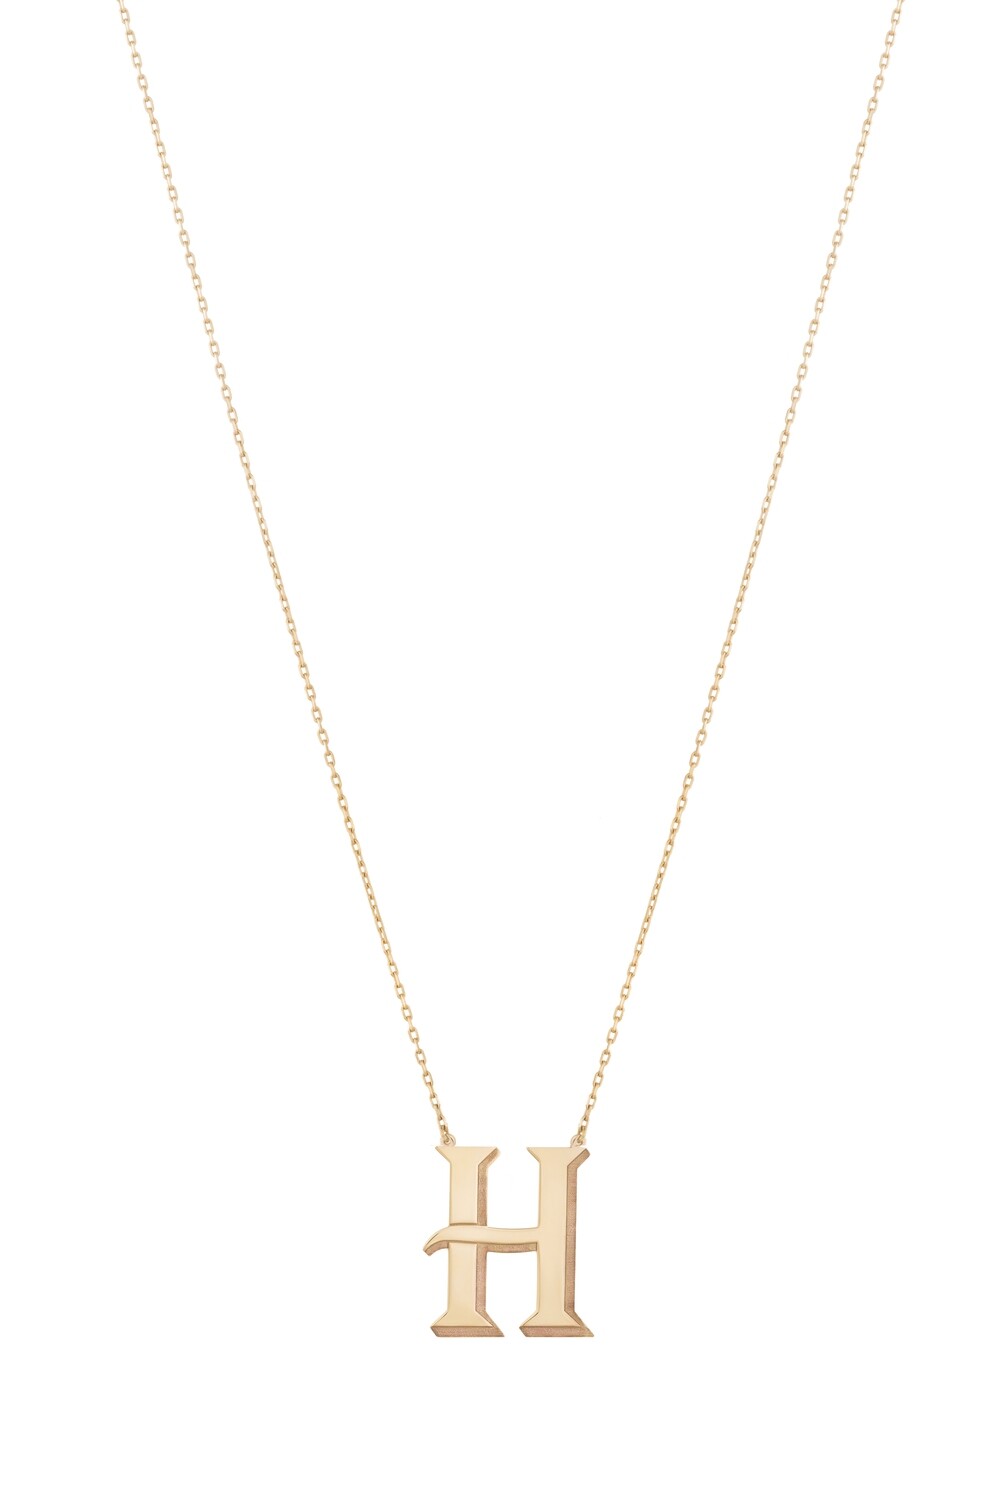 Initials Gold Necklace Letter H